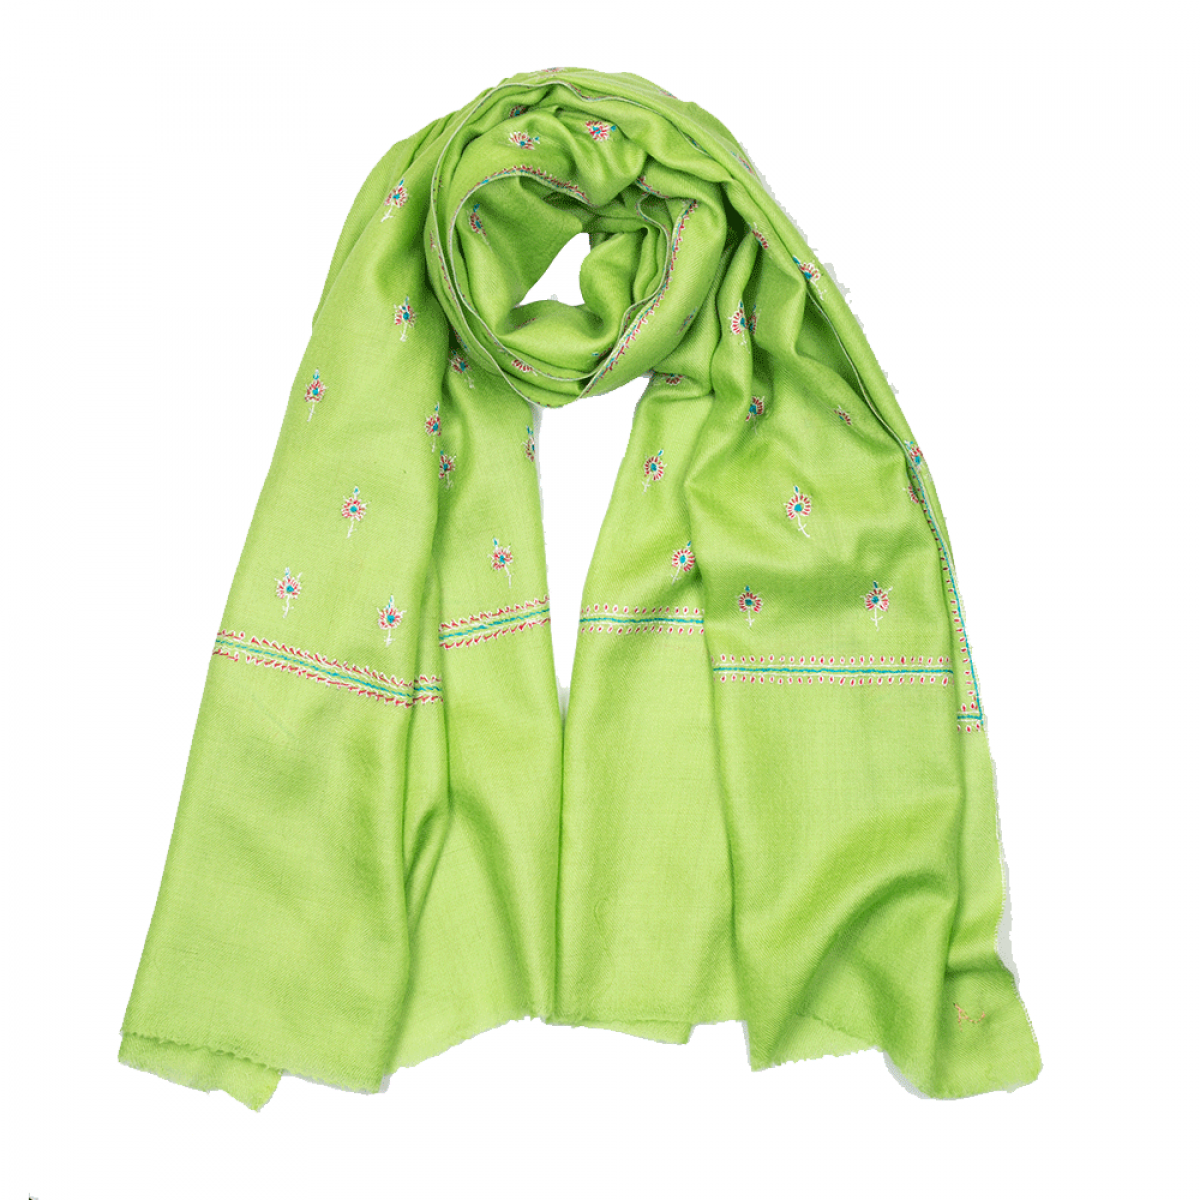 Embroidered Pashmina Stole - Neon Green & Blue